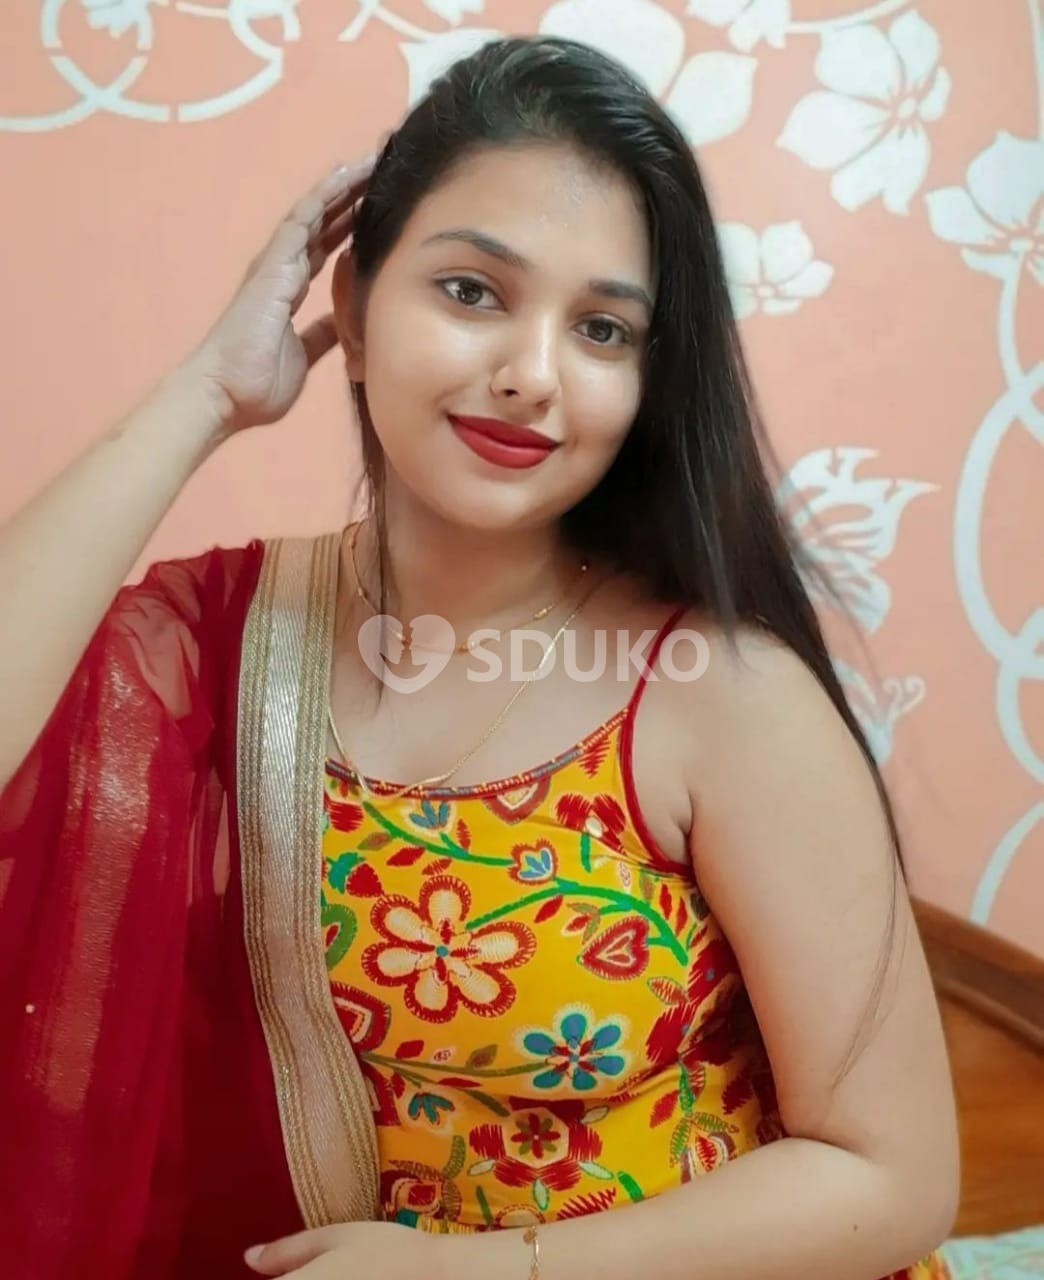 VIP call girl service full safe and secure high profile low price genuine service in call out call available Disha Sharm